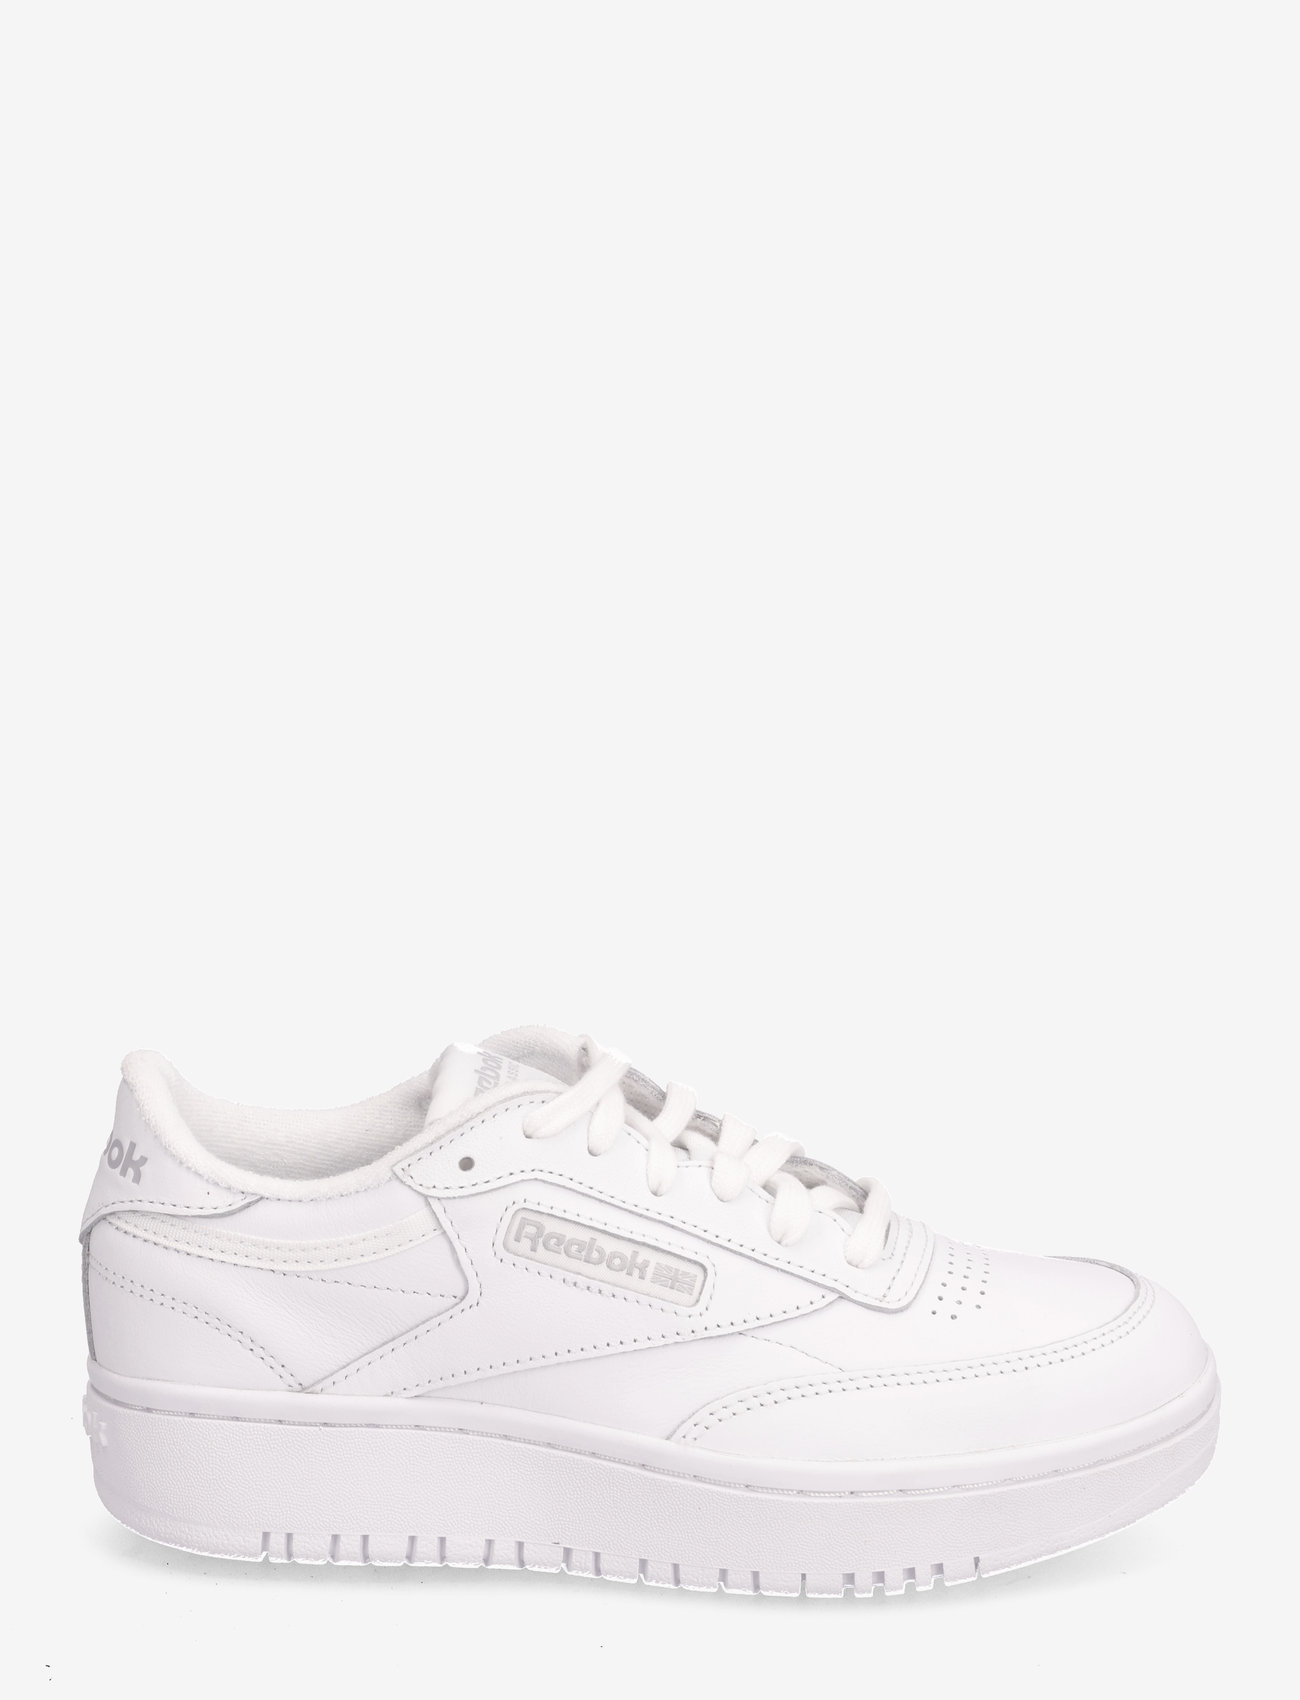 Reebok Classics - CLUB C DOUBLE - sneakers - ftwwht/ftwwht/cdgry2 - 1